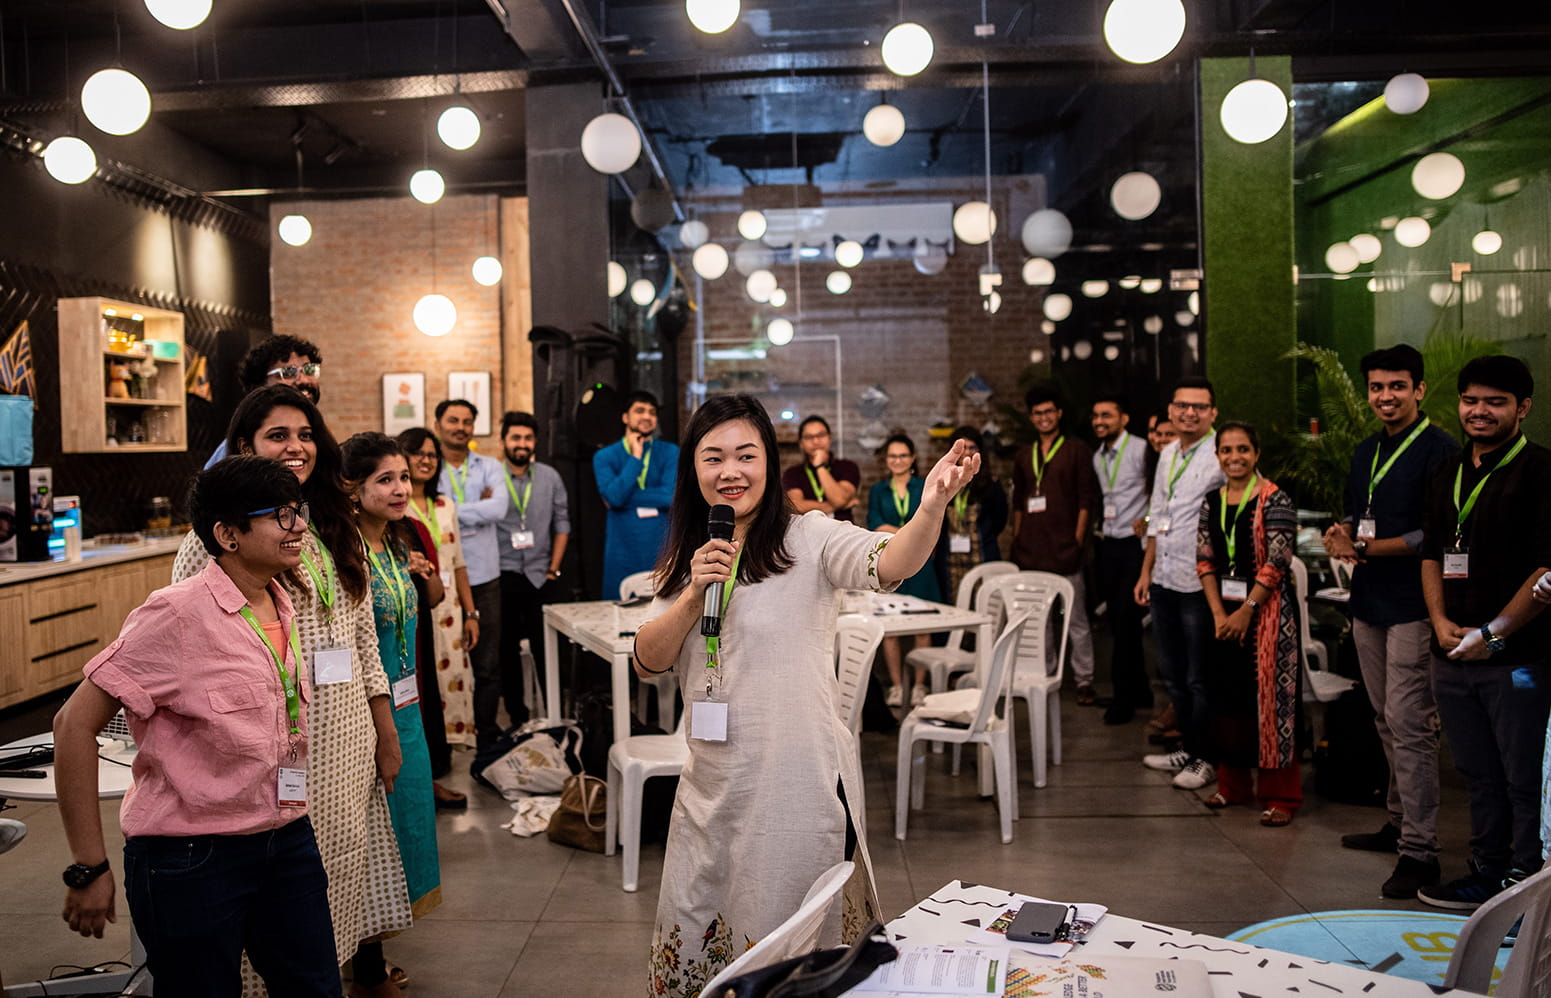 Coming from eight different cities across India, the YSEs kickstarted their two-day workshop of learning and networking with a round of icebreaker games to get to know their fellow changemakers